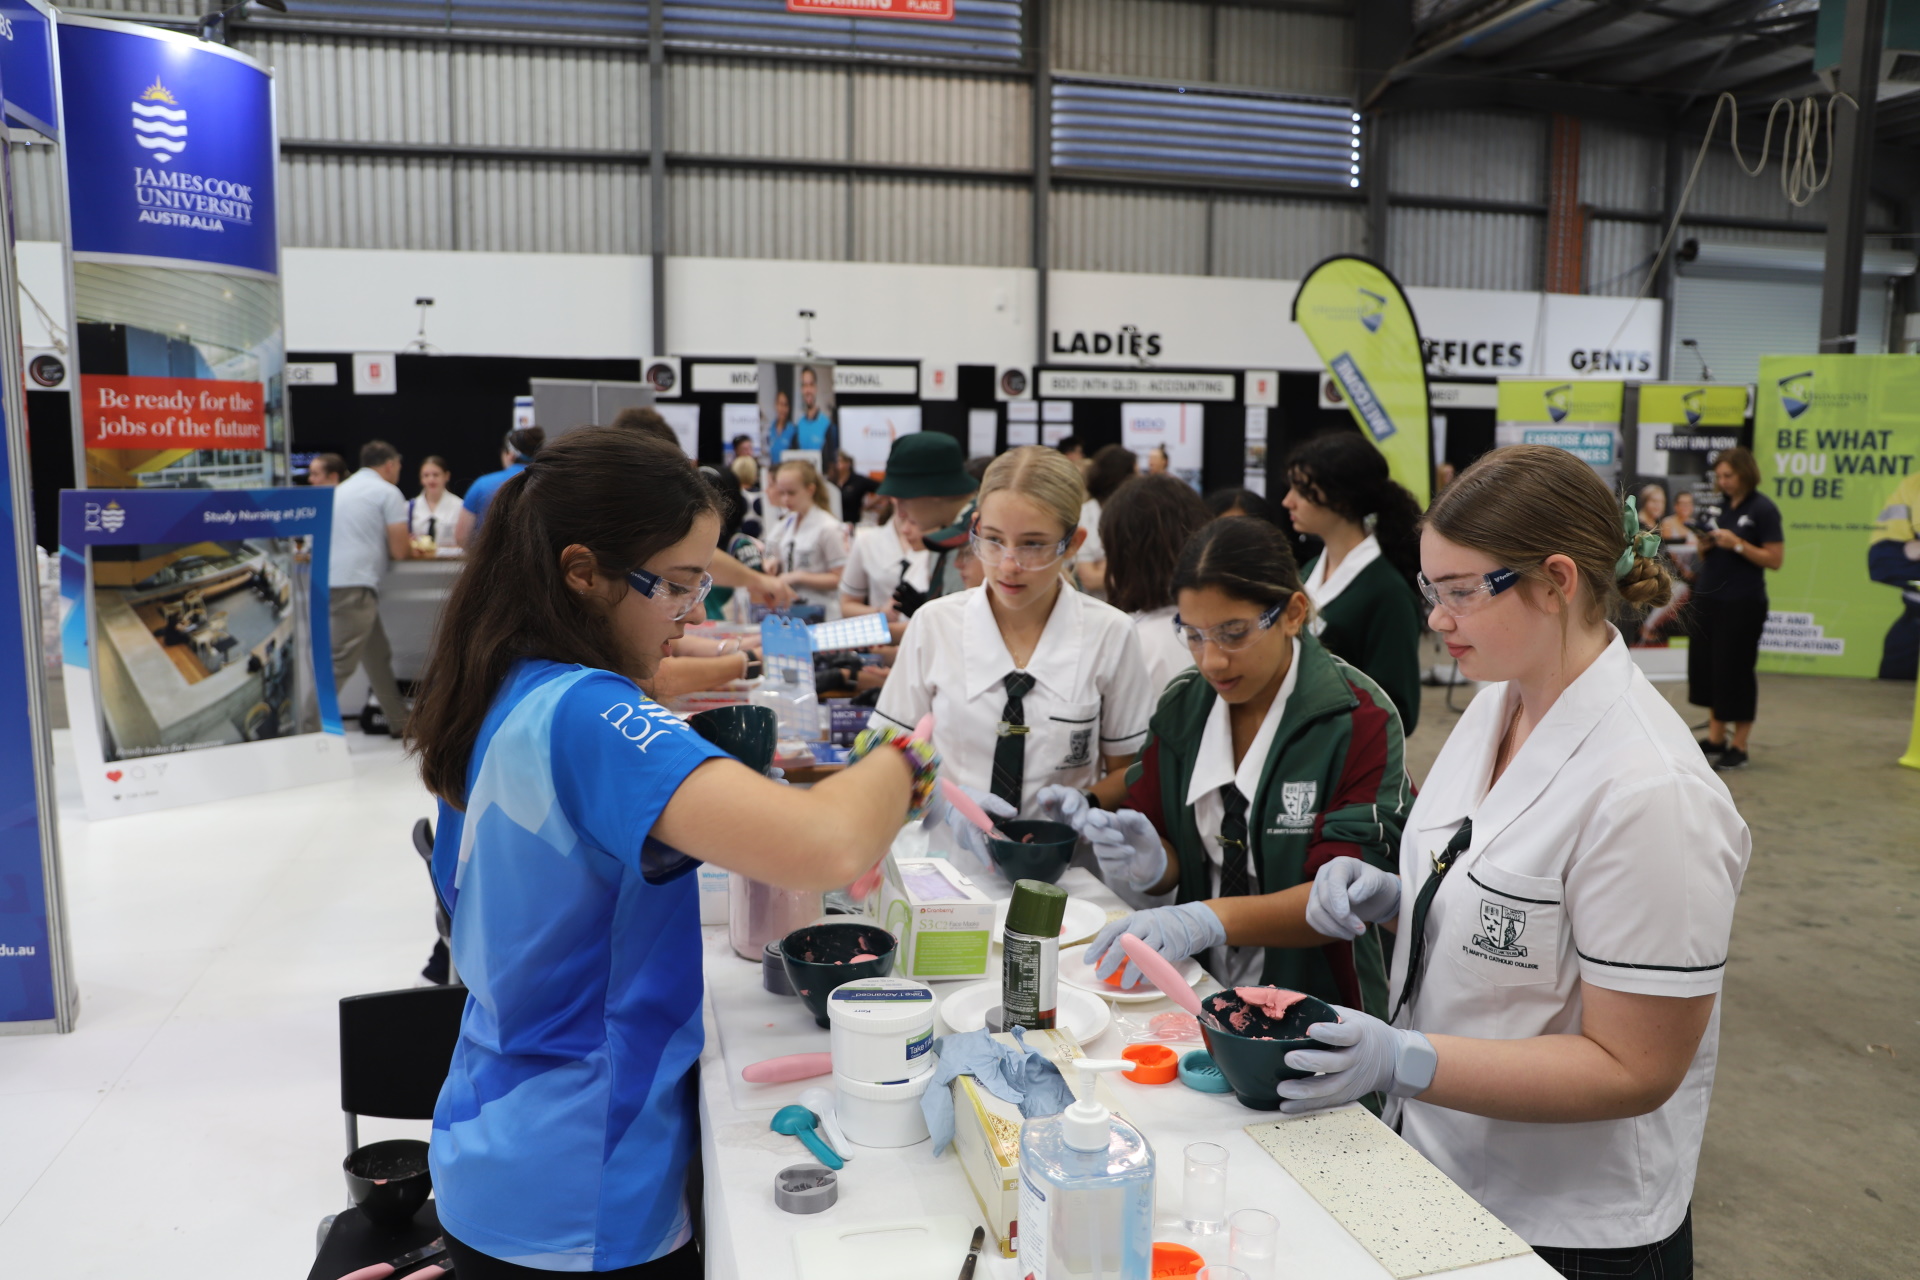 A JCU Ambassador showing dentistry moulds to high school students at a dentistry booth.